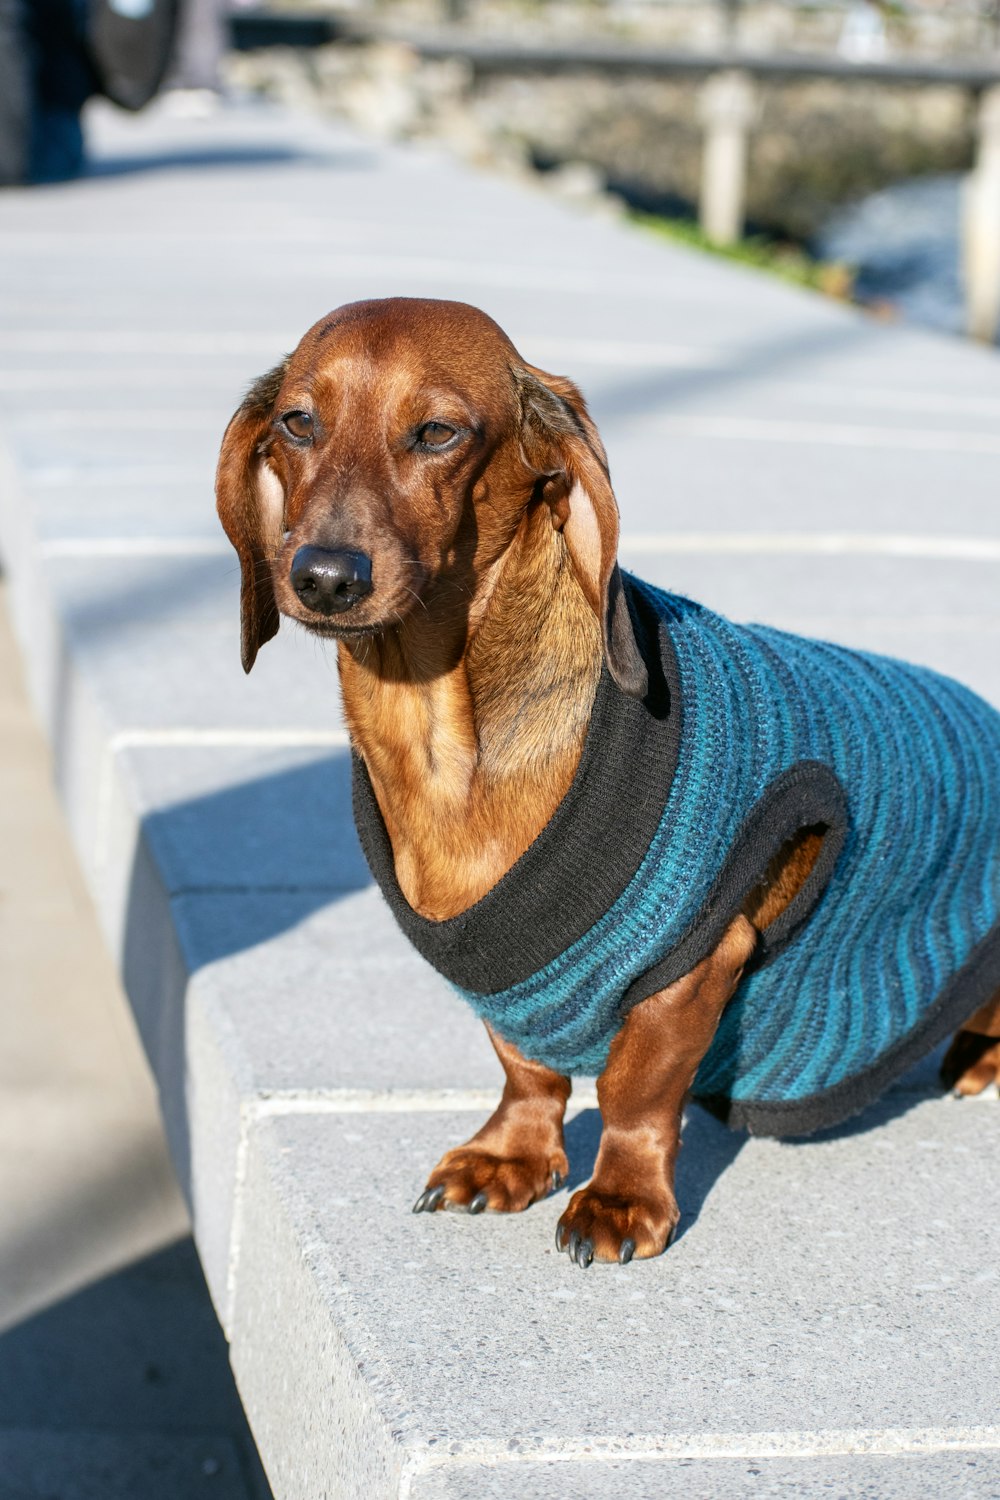 a dachshund wearing a sweater sitting on a concrete bench